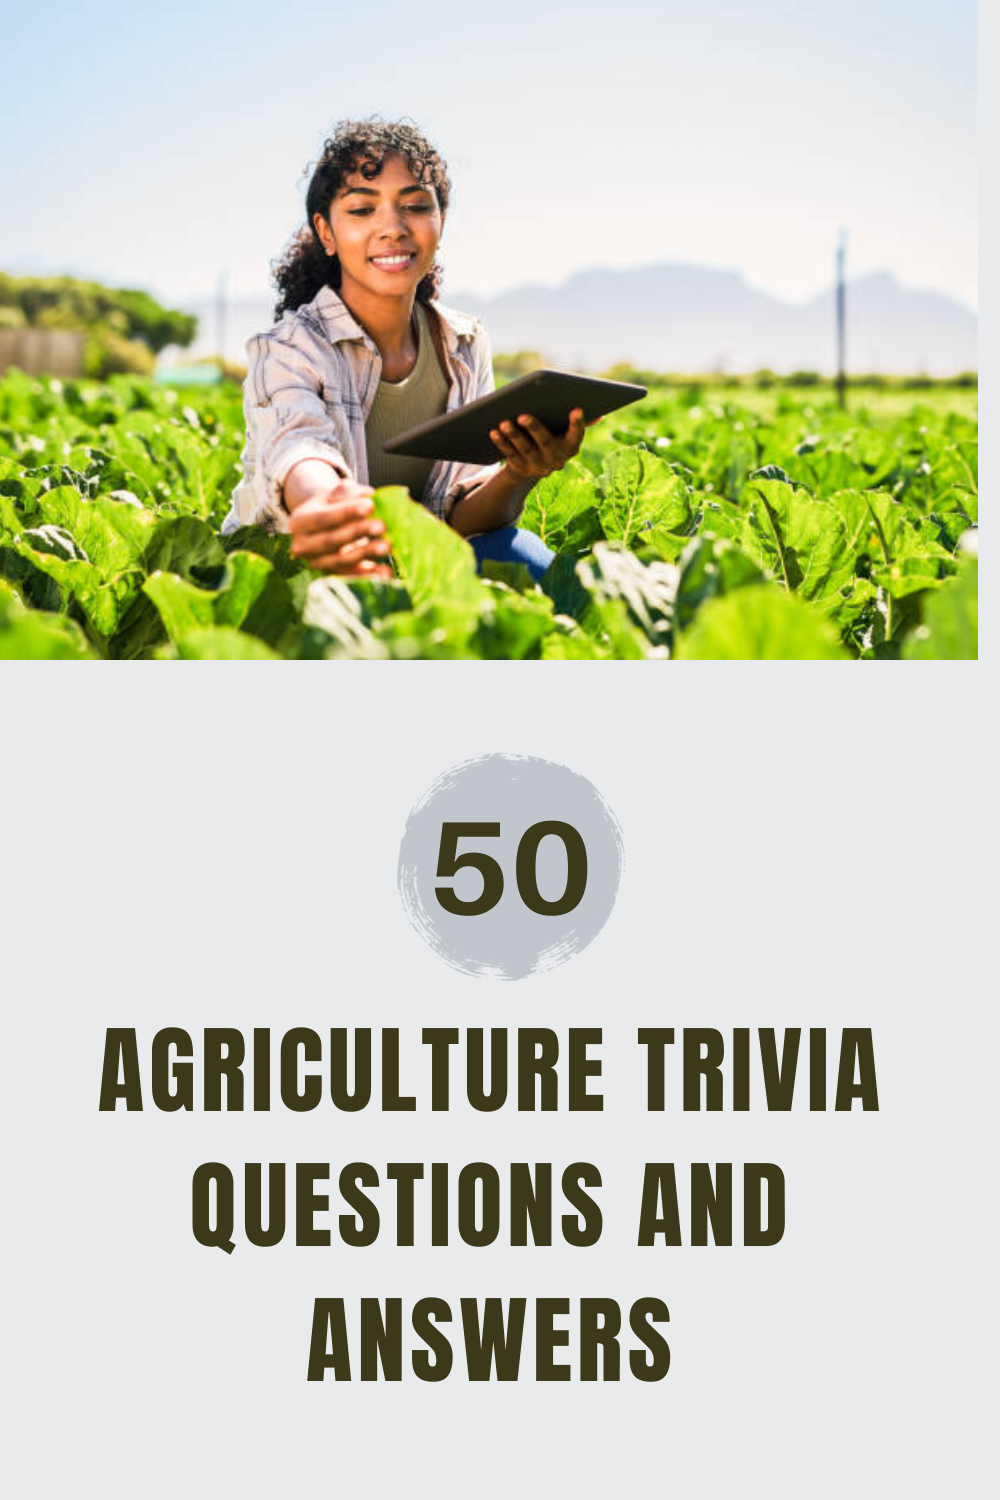 Agriculture Trivia Questions and Answers